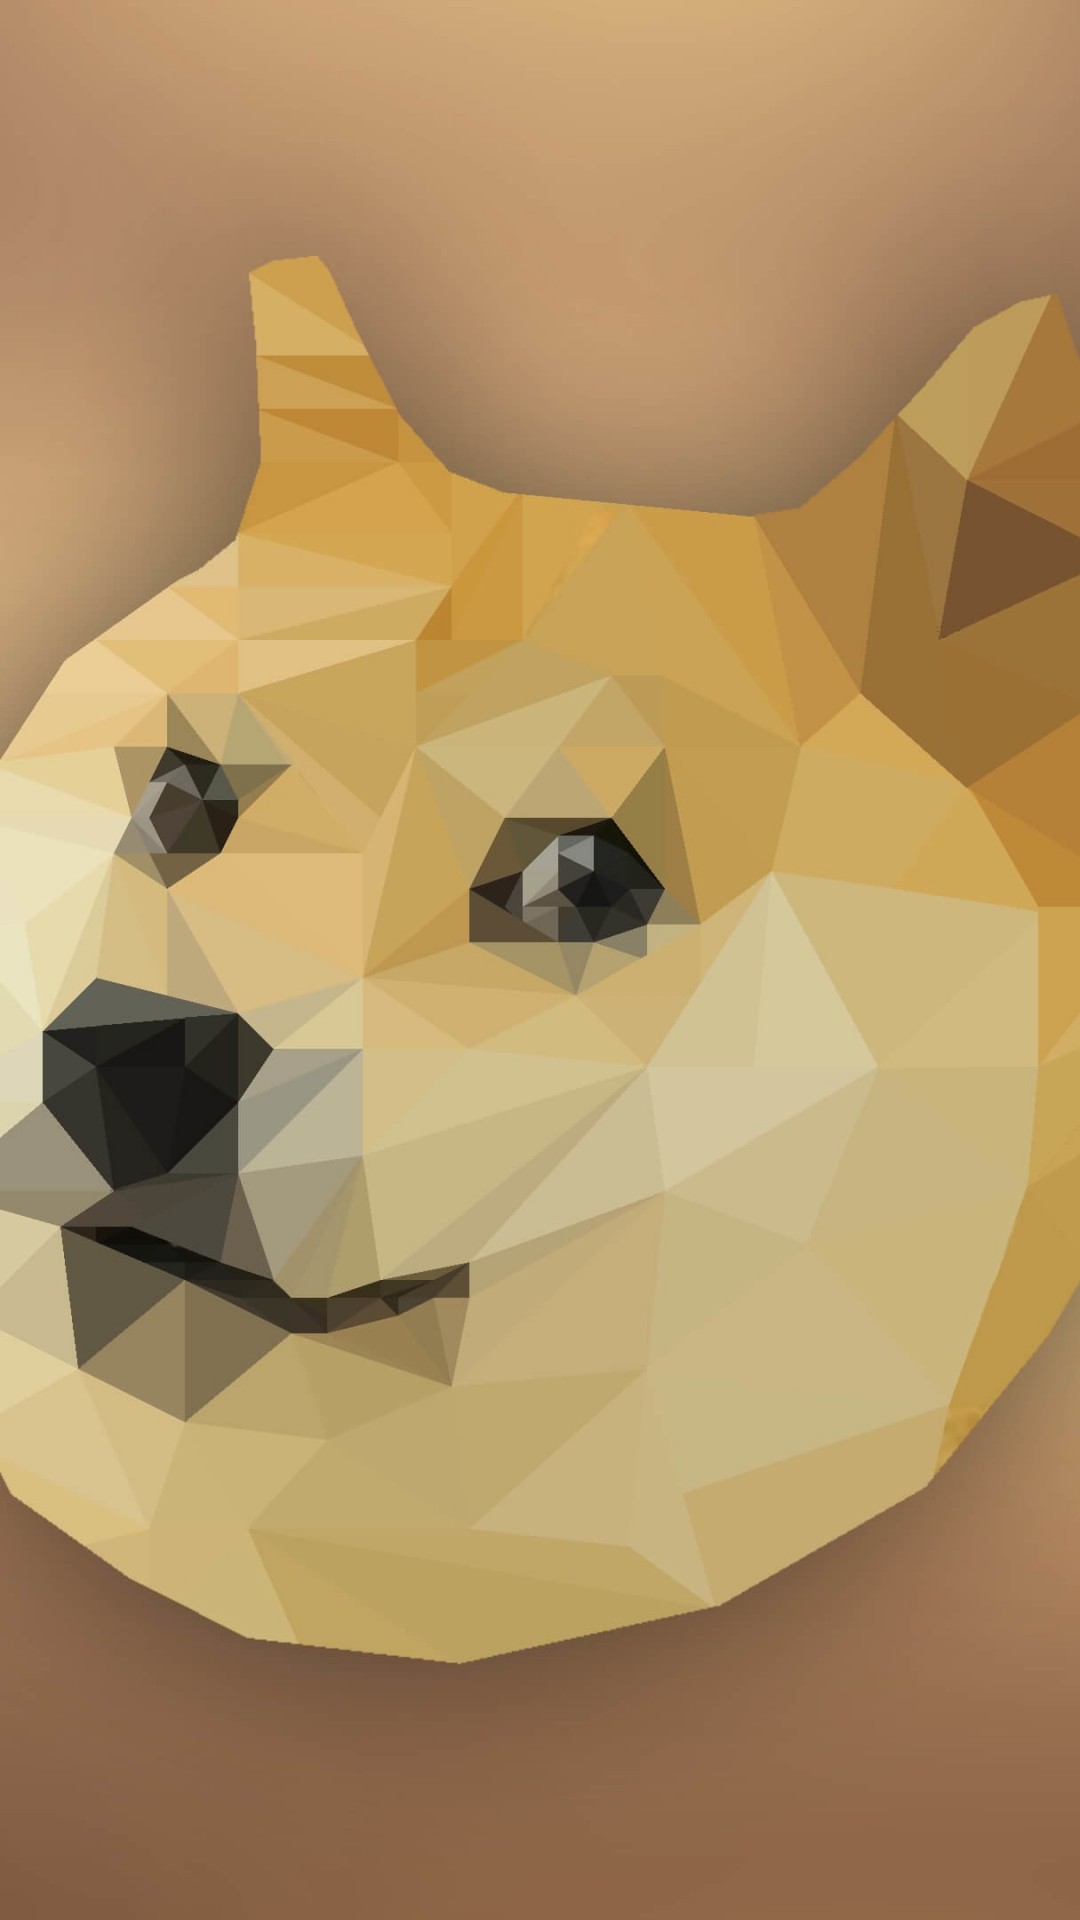 Low Poly Doge Wallpaper for LG G2